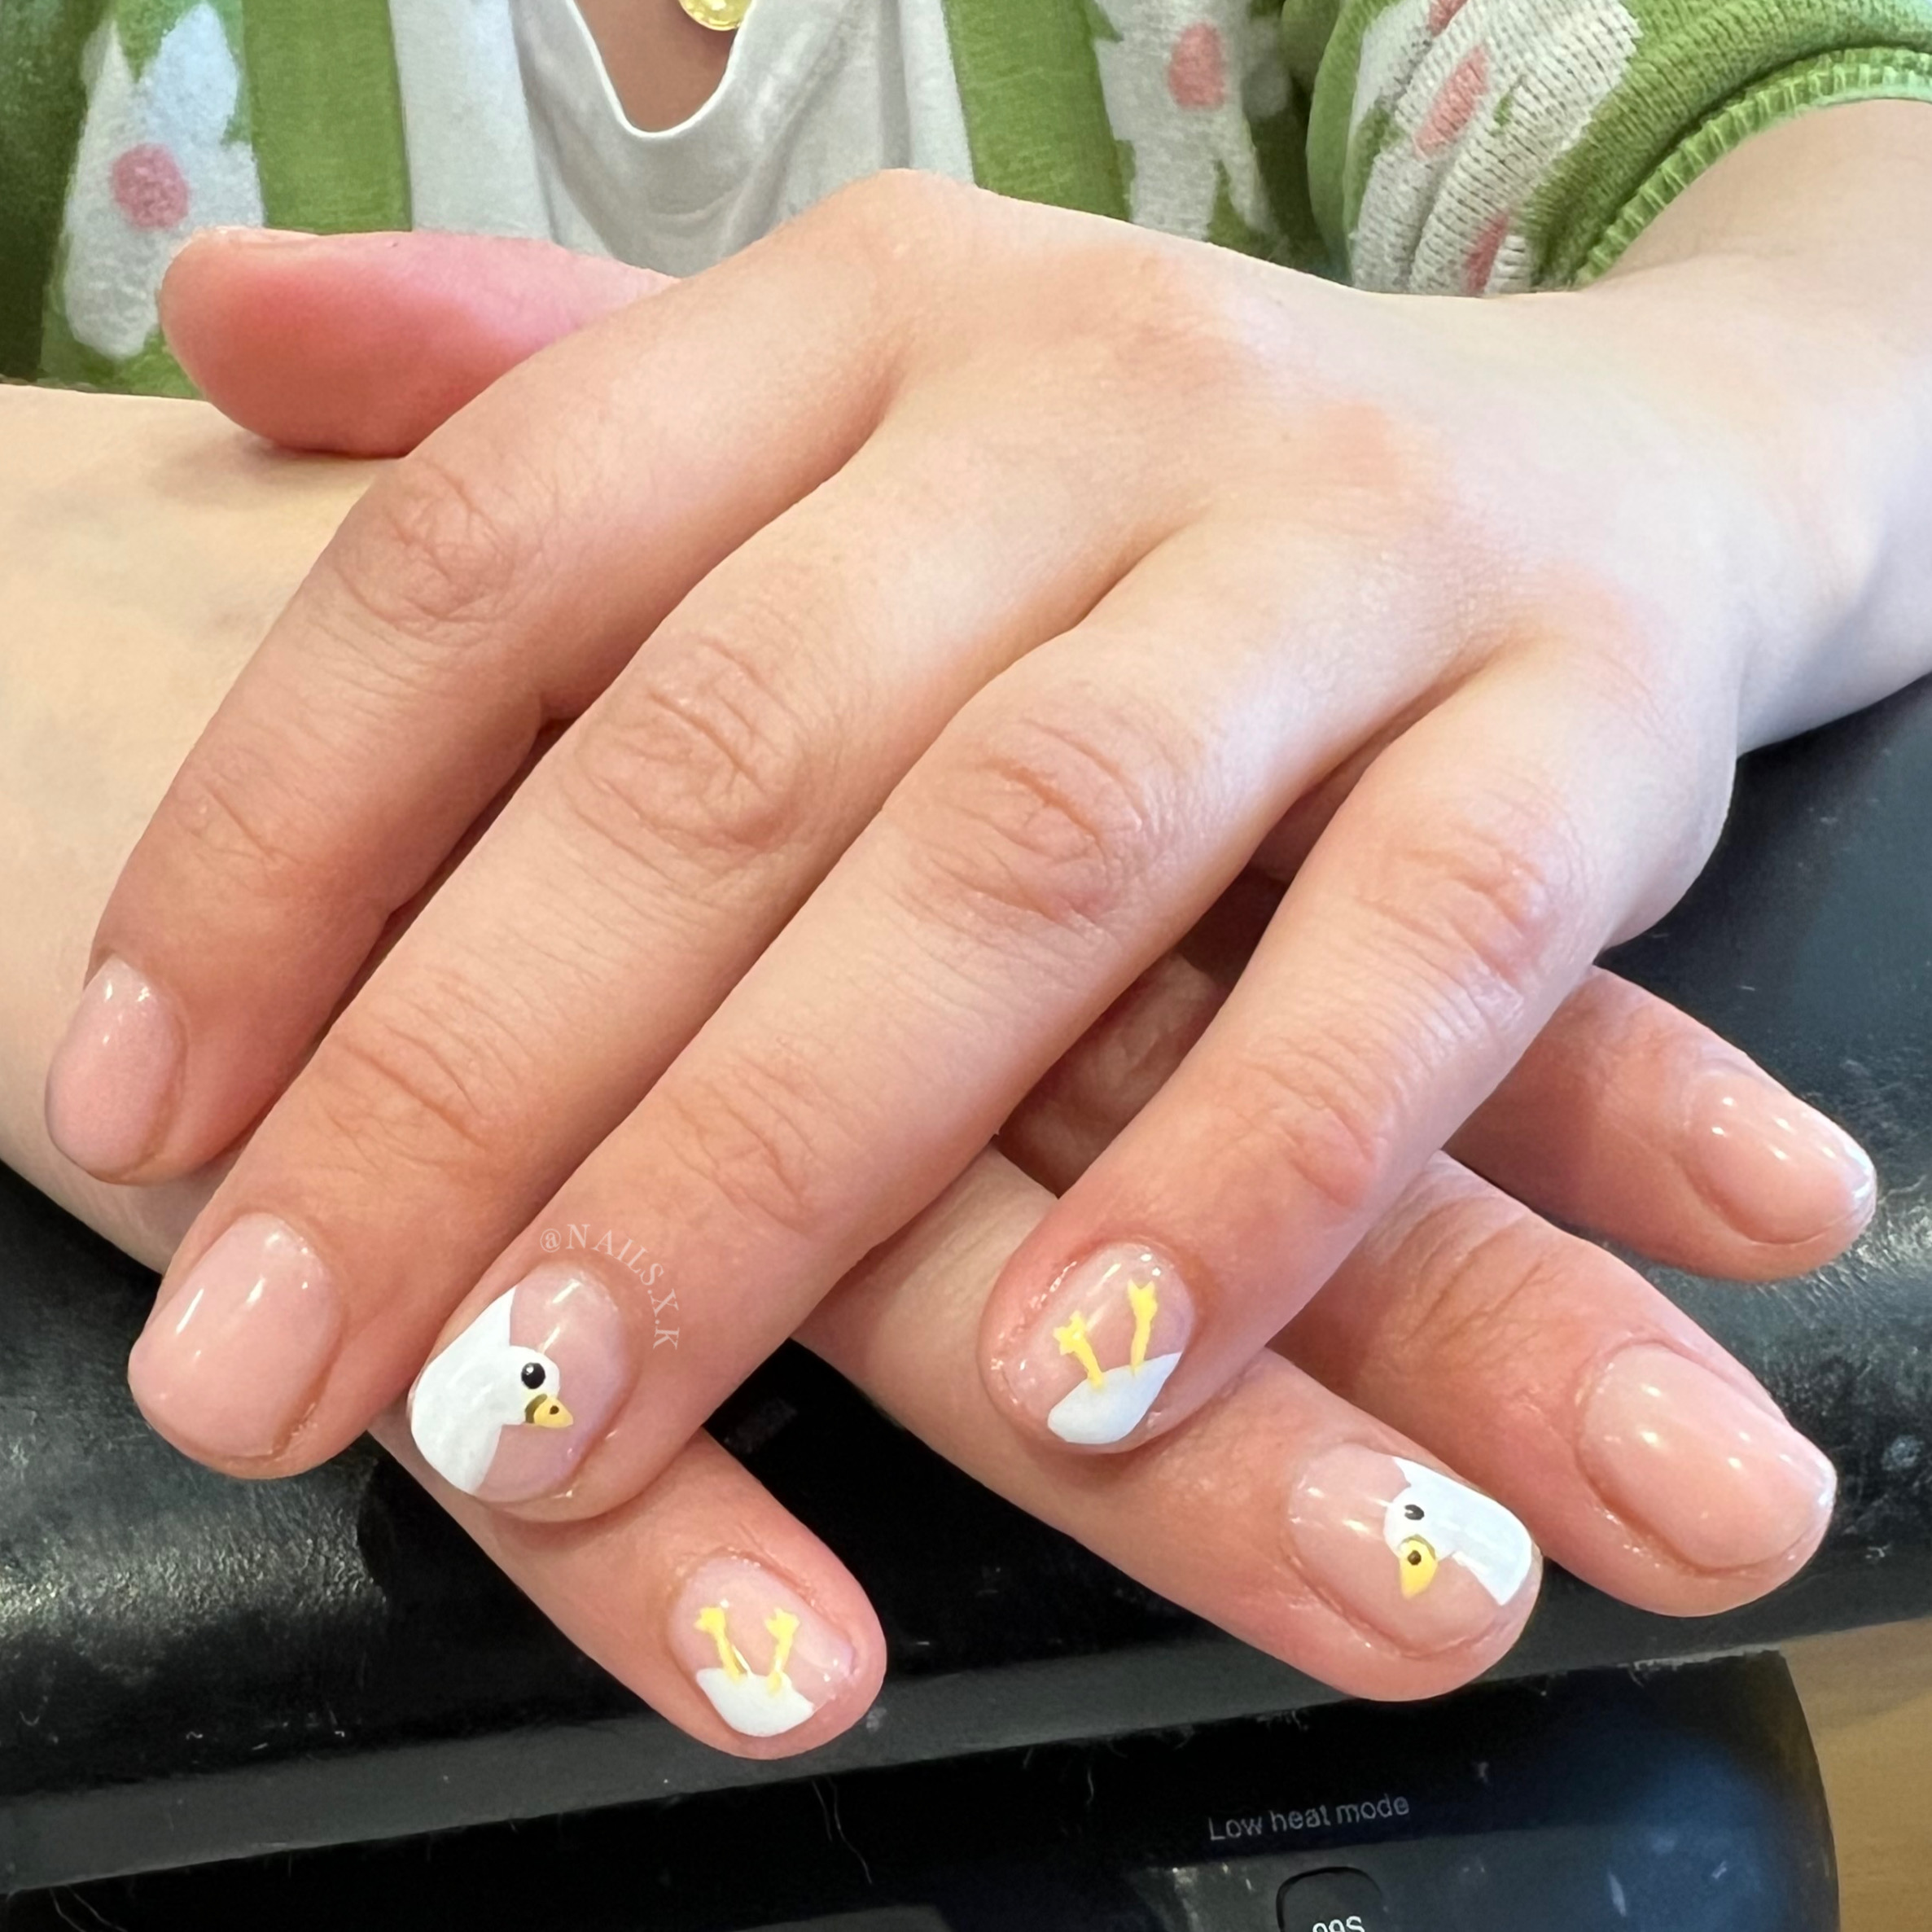 Gel manicure with nude background and hand painted ducks. Nails by K